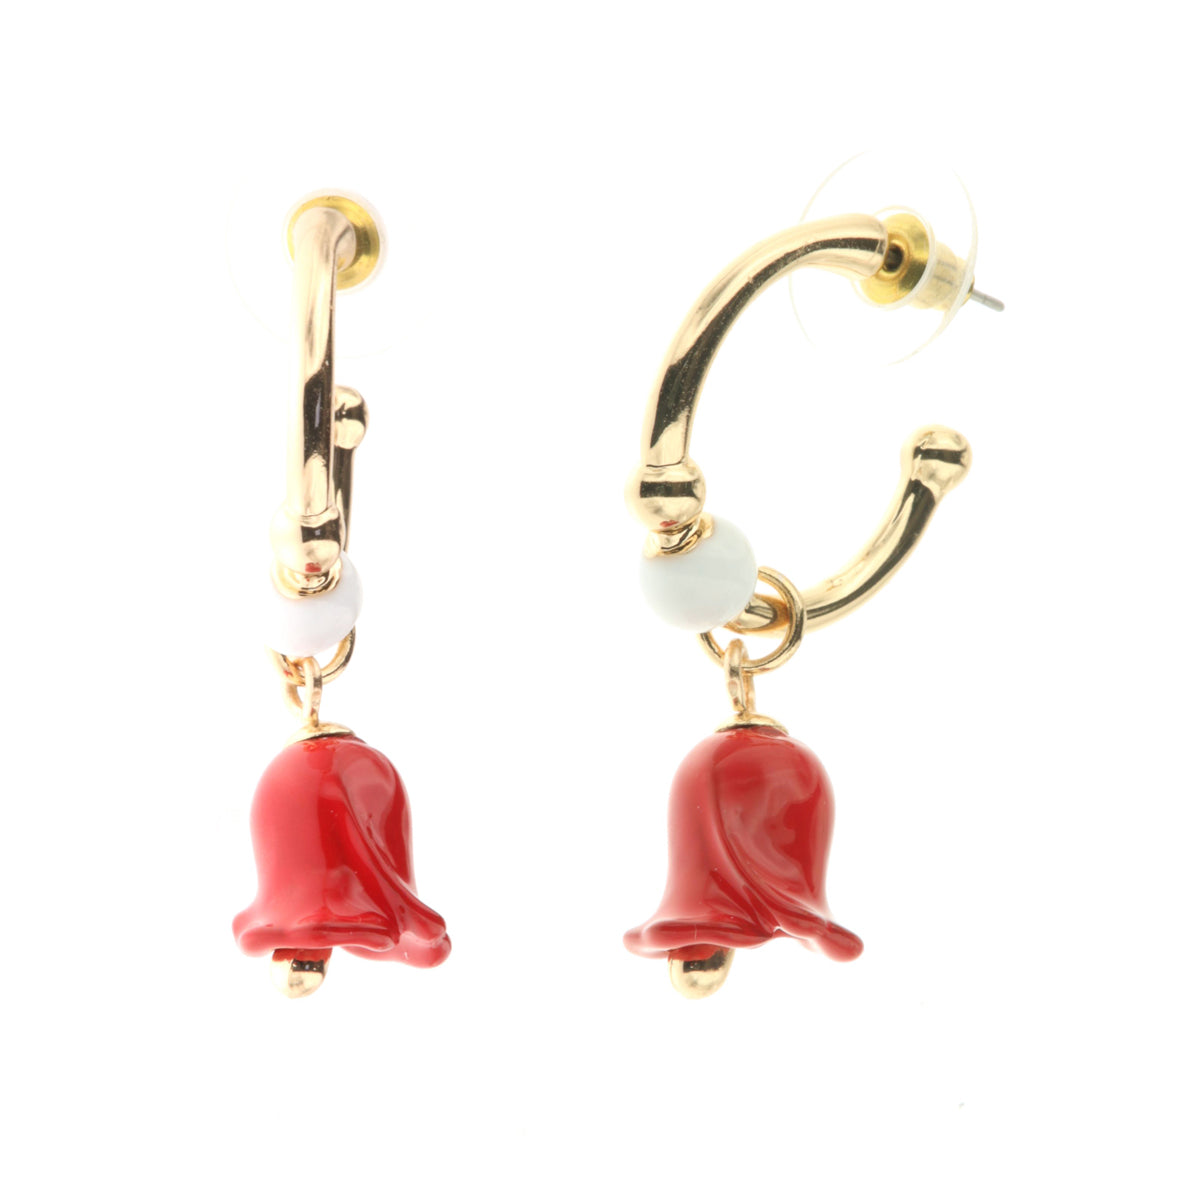 Semicarchie metal earrings with white enameled detail and rose -shaped bell